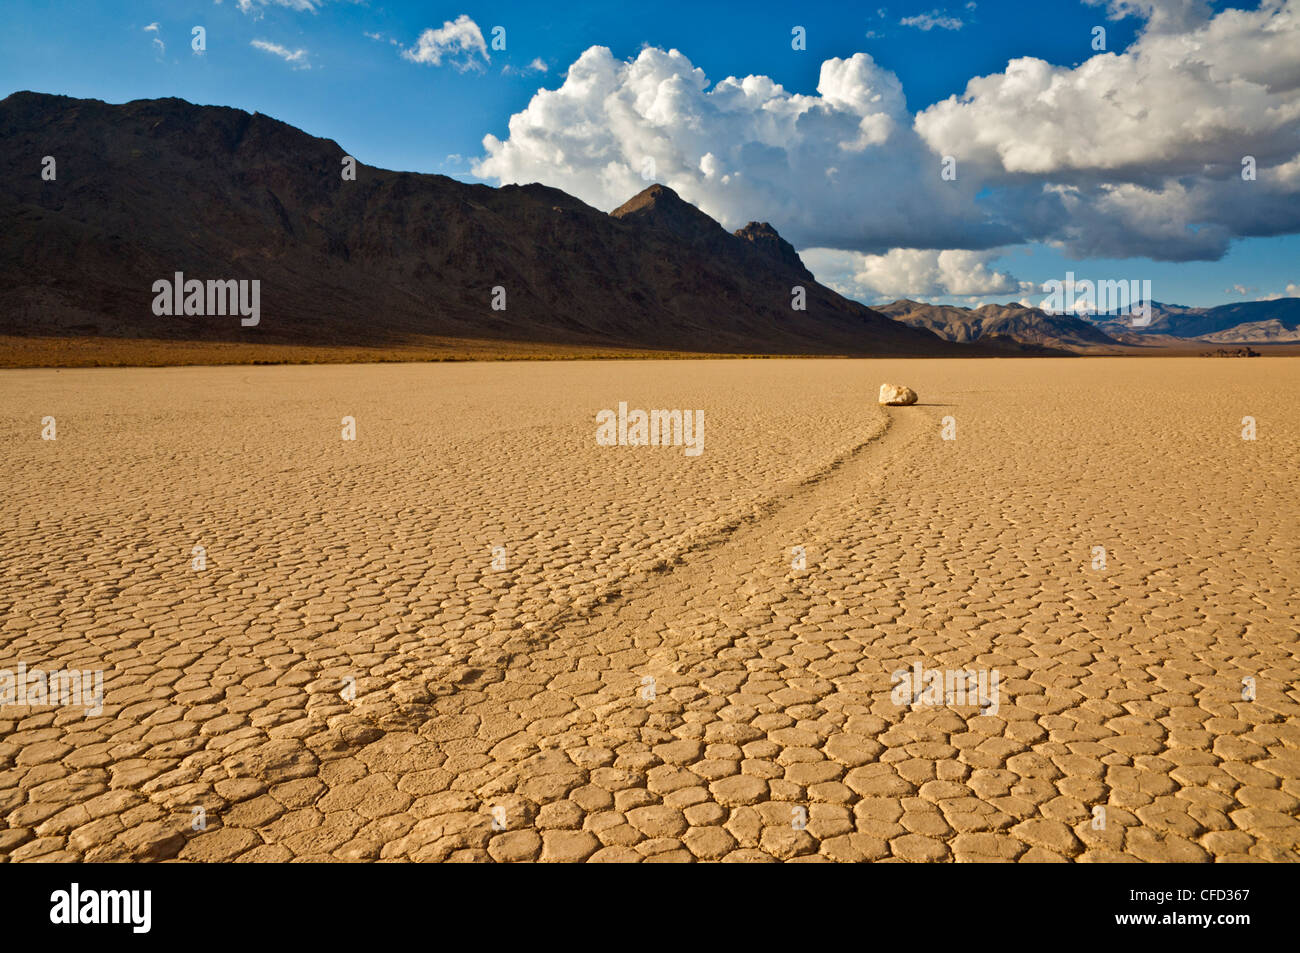 The Grandstand in Racetrack Valley, Death Valley National Park, California, USA Stock Photo